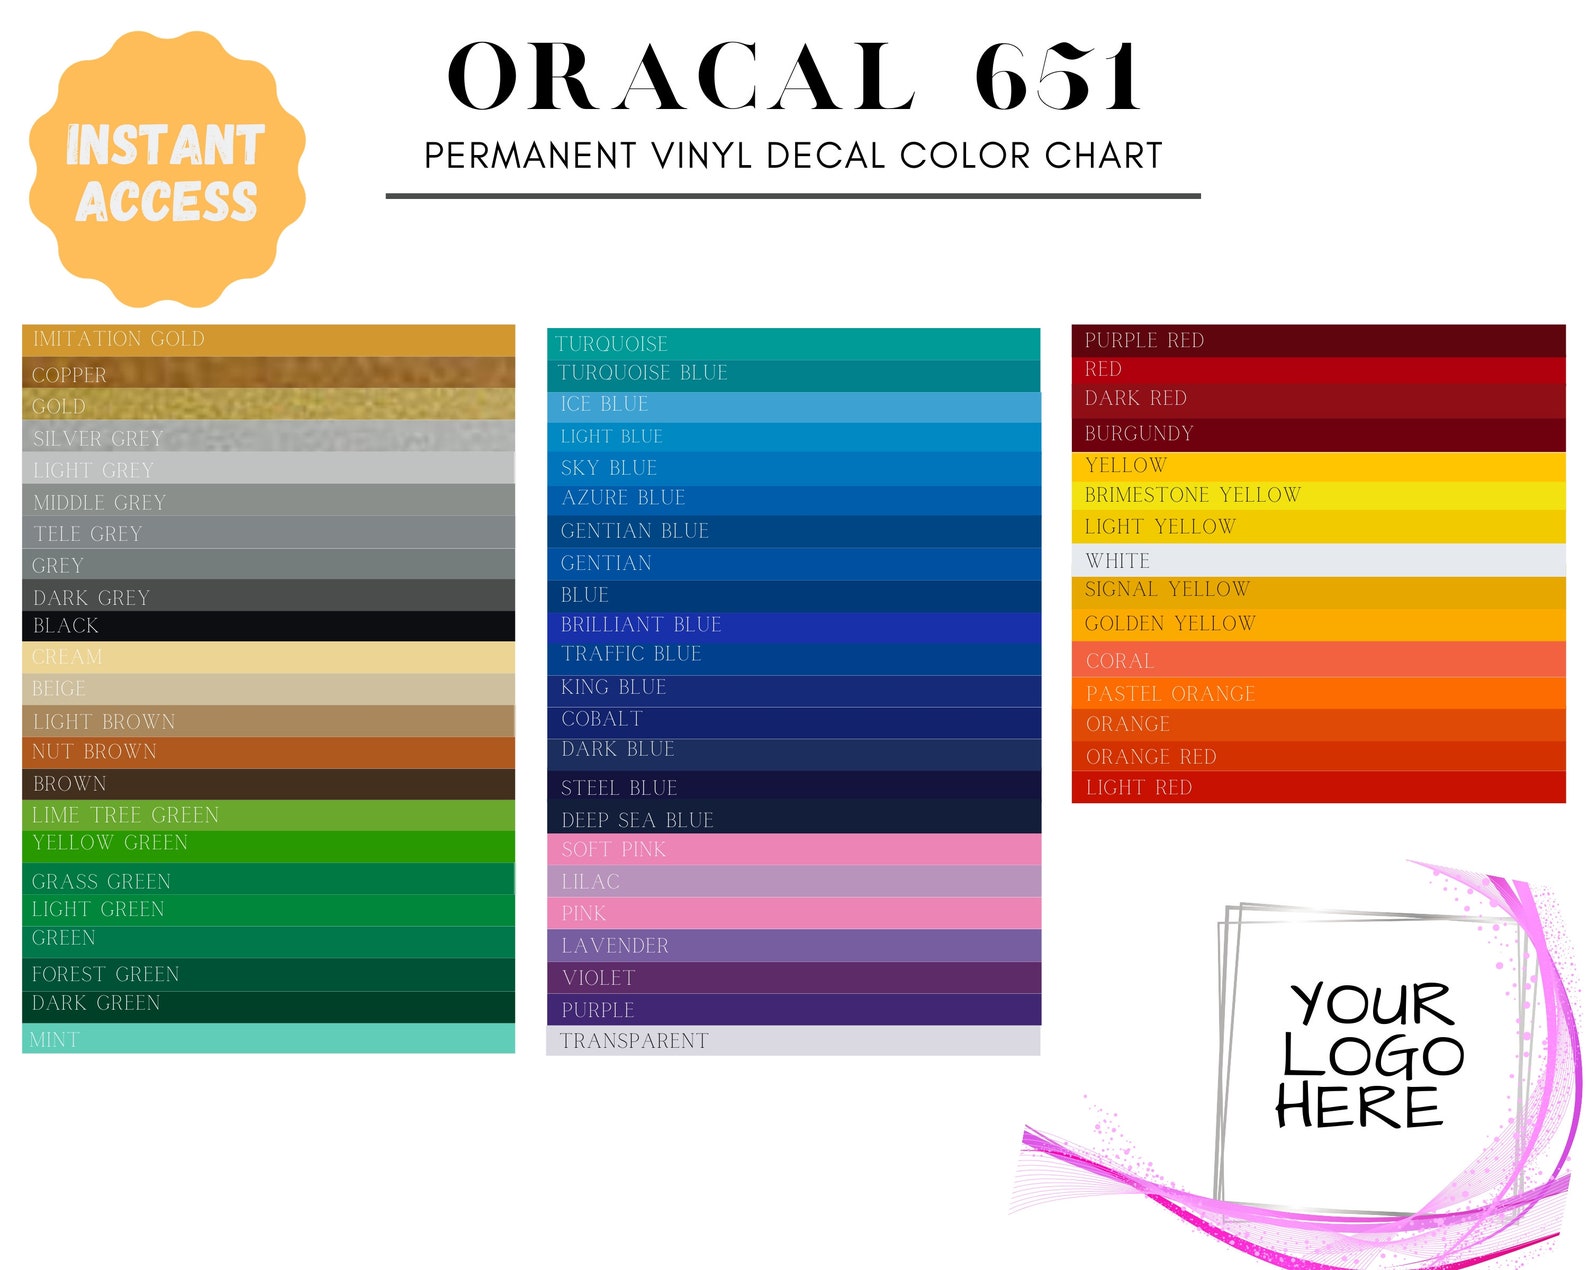 Oracal 651 color chart Permanent Vinyl Decal Color Chart | Etsy